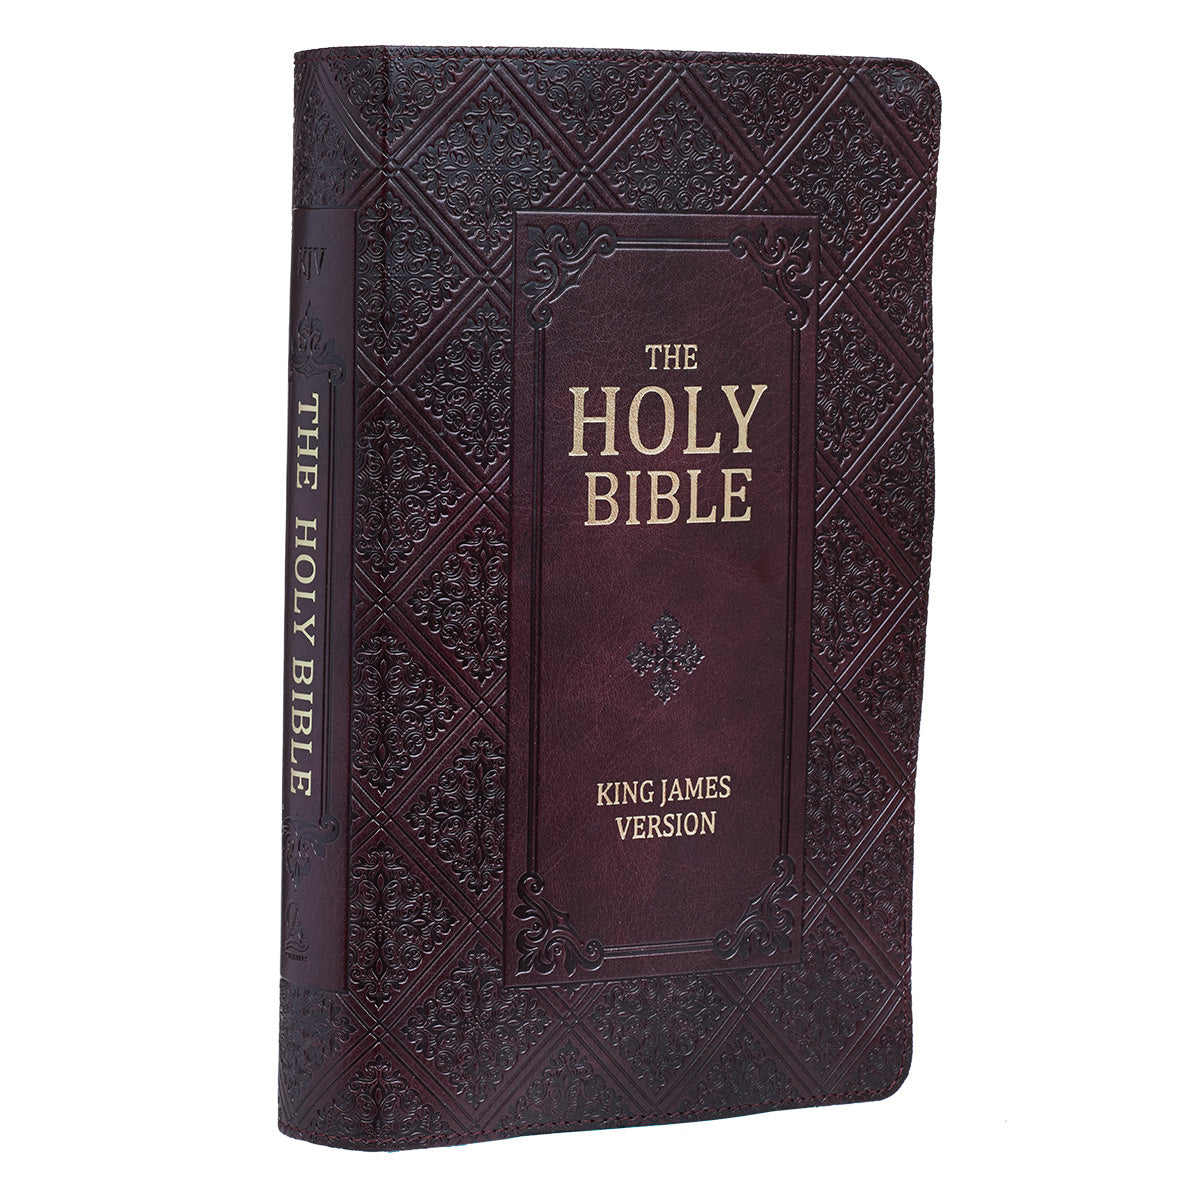 Image of KJV Giant Print Bible, Dark Brown, Lux-Leather Pattern, Words of Christ in Red, Footnote Verse Cross-Reference, Concordance, Bible Reading Plan other